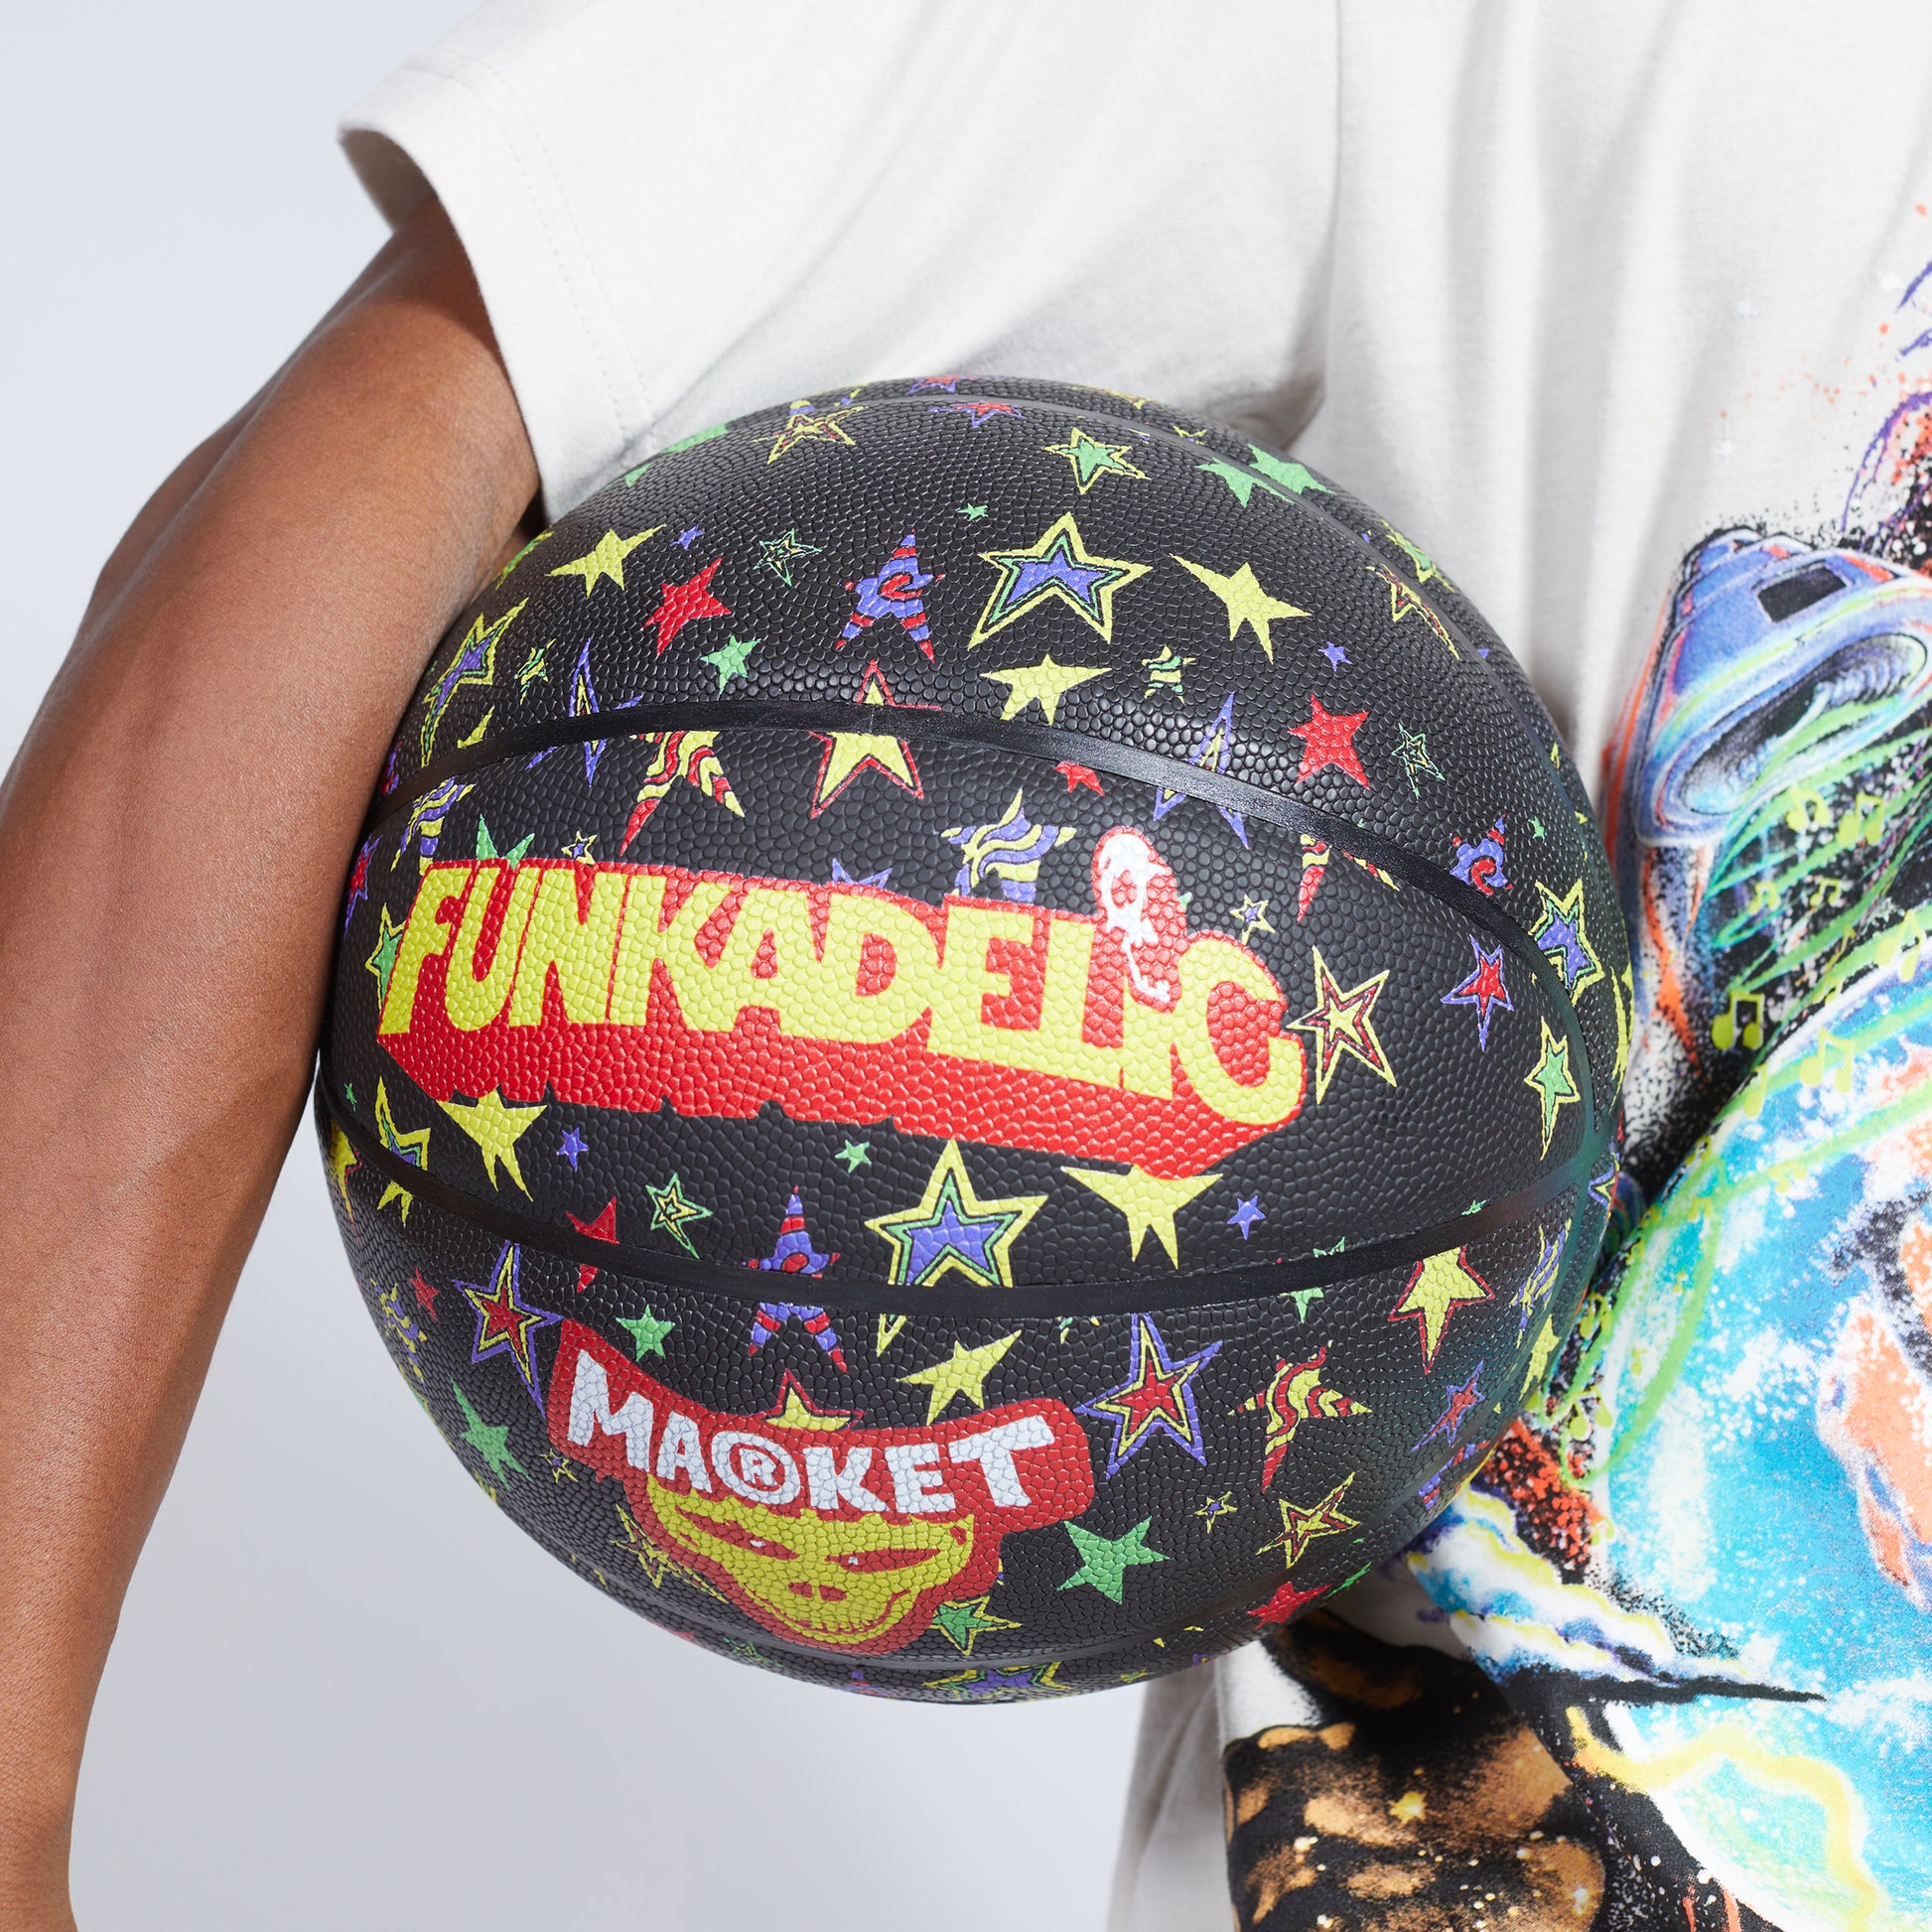 MARKET clothing brand FUNKADELIC MARKET STAR BASKETBALL. Find more basketballs, sporting goods, homegoods and graphic tees at MarketStudios.com. Formally Chinatown Market.